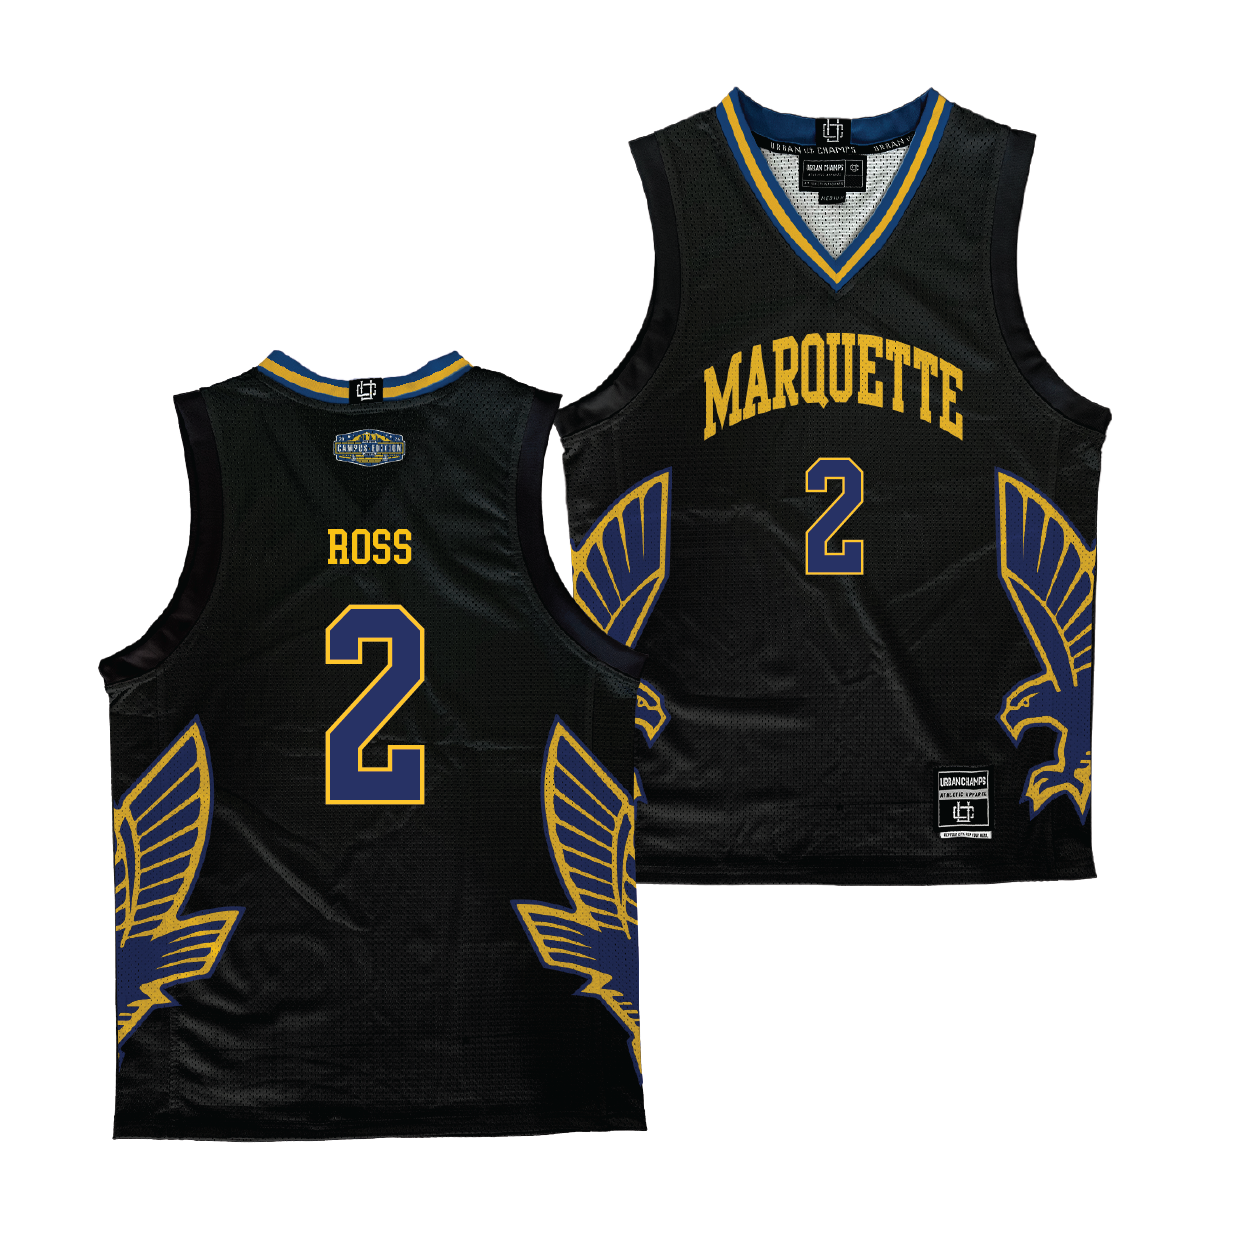 Marquette Campus Edition NIL Jersey - Chase Ross | #2